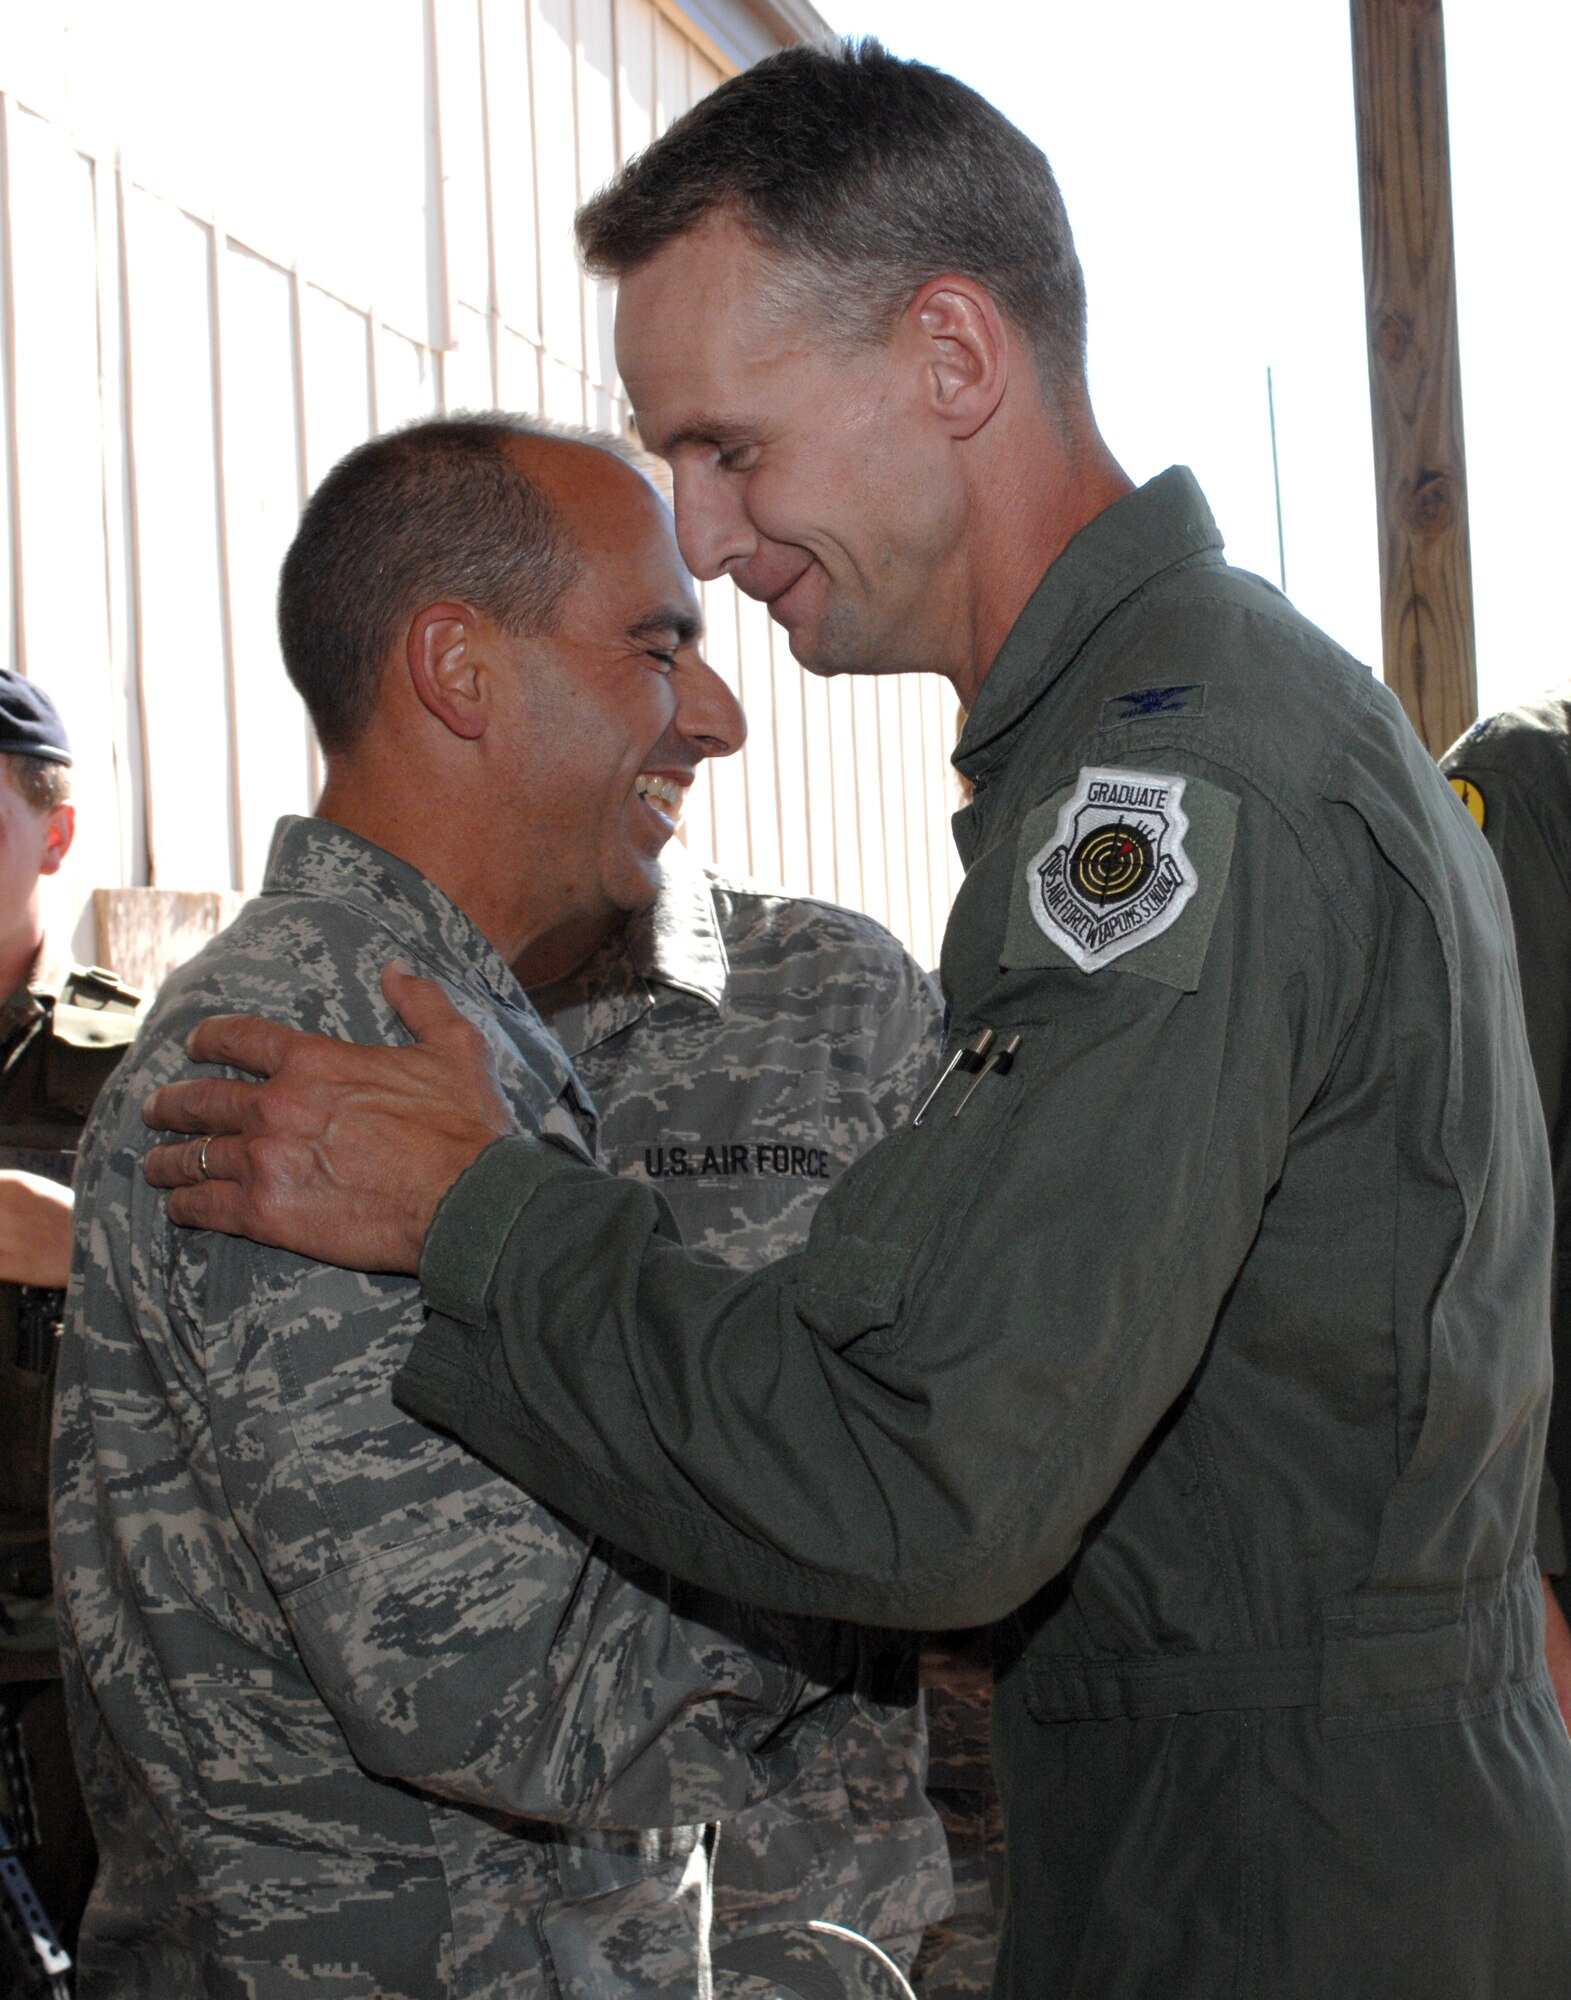 Col. Michael Stapleton, 49th Operations Group commander, shakes the hand of Col. Jeff Harrigian, 49th Fighter Wing commander, at the Air Force birthday celebration outside the 7th Fighter Squadron at Holloman Air Force Base, N.M., September 16. Colonel Harrigian executed the honors of cutting the cake along with Airman 1st Class Joshua Fiske, 49th Operations Support Squadron, in honor of the Air Force?s 61st birthday. (U.S. Air Force photo/Airman Sondra M. Escutia)